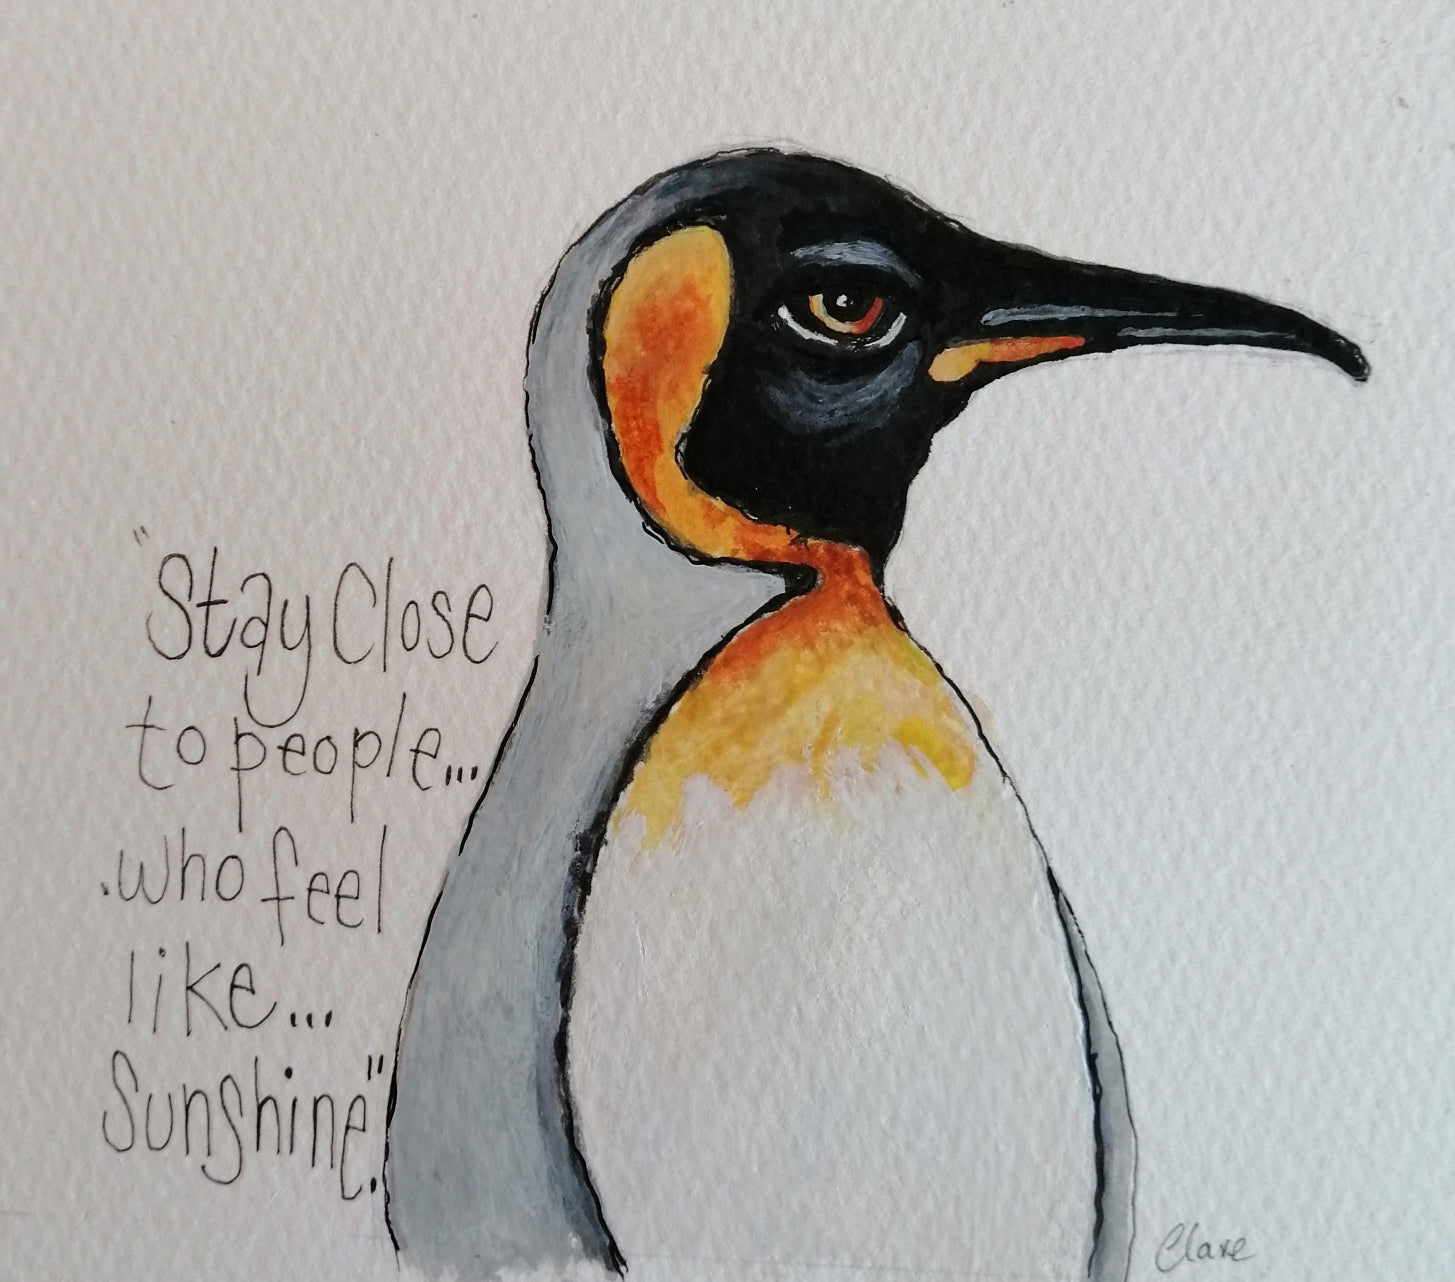 Siobhan the Penguin - Stay close to people.... who feel like sunshine. Mounted original smiley sketch.